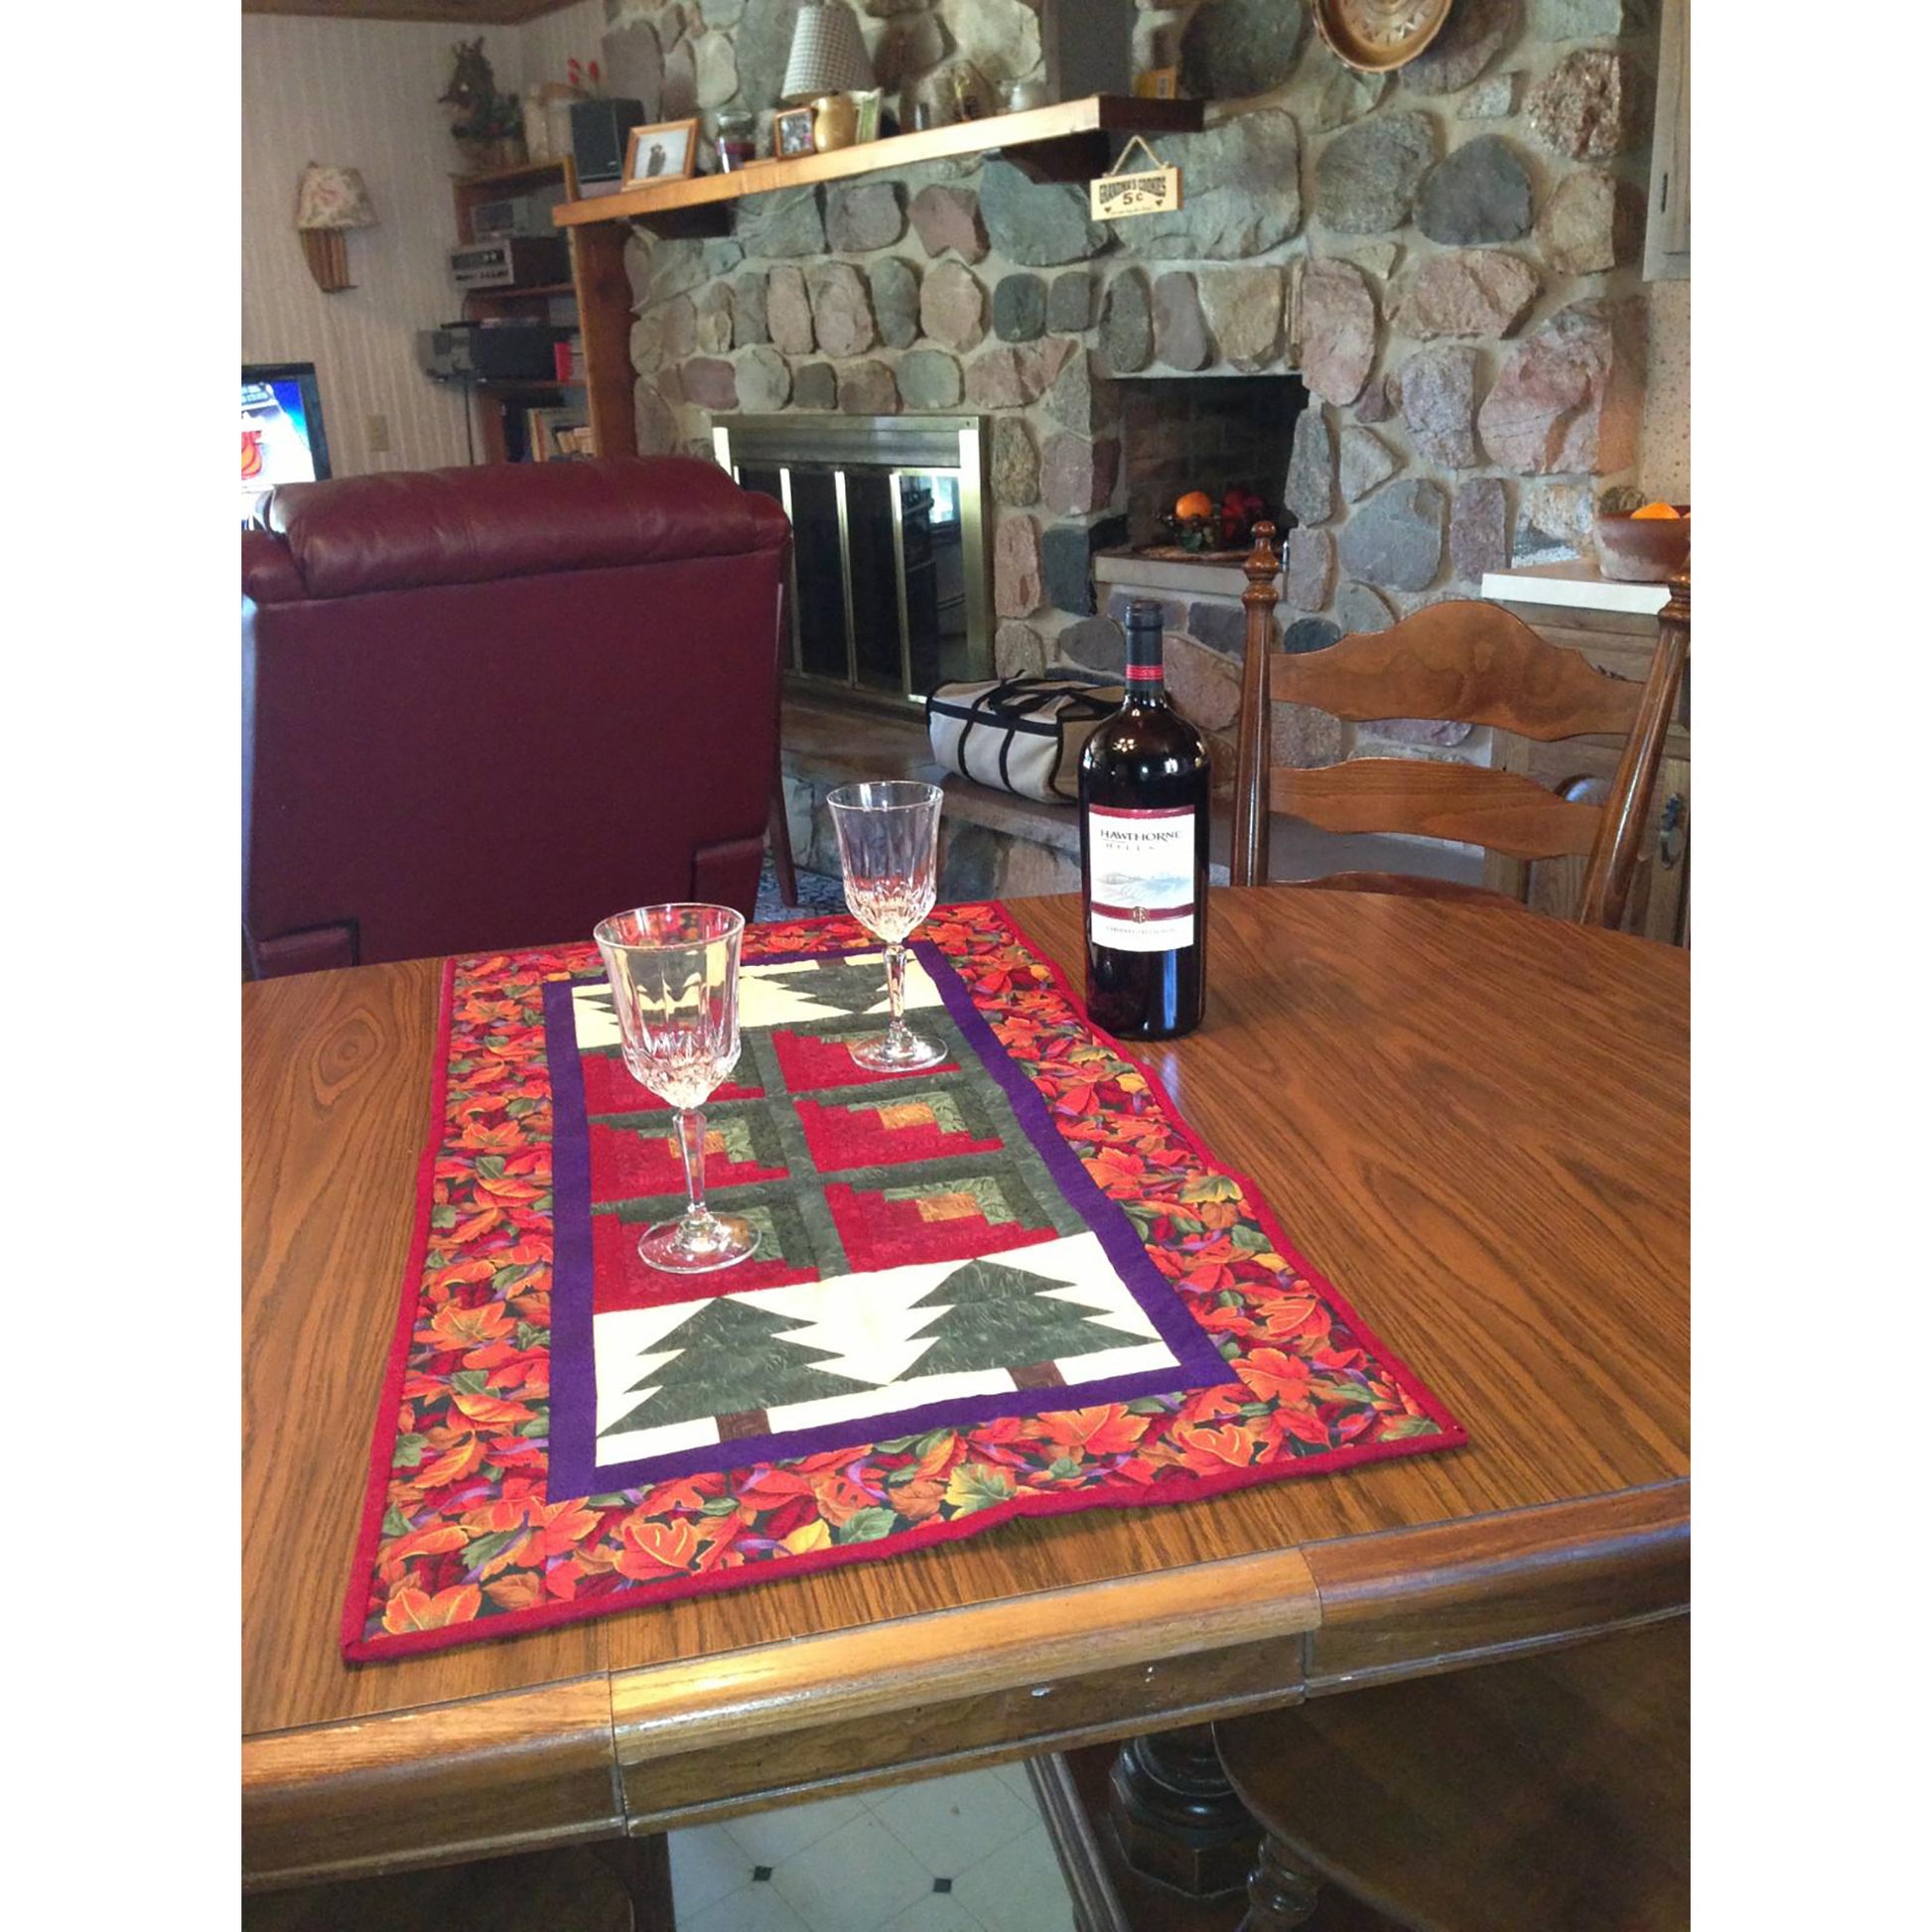 A rustic table set with a wine glass and a bottle of wine, perfect for cozy evenings by the fire at a lakeside cabin.